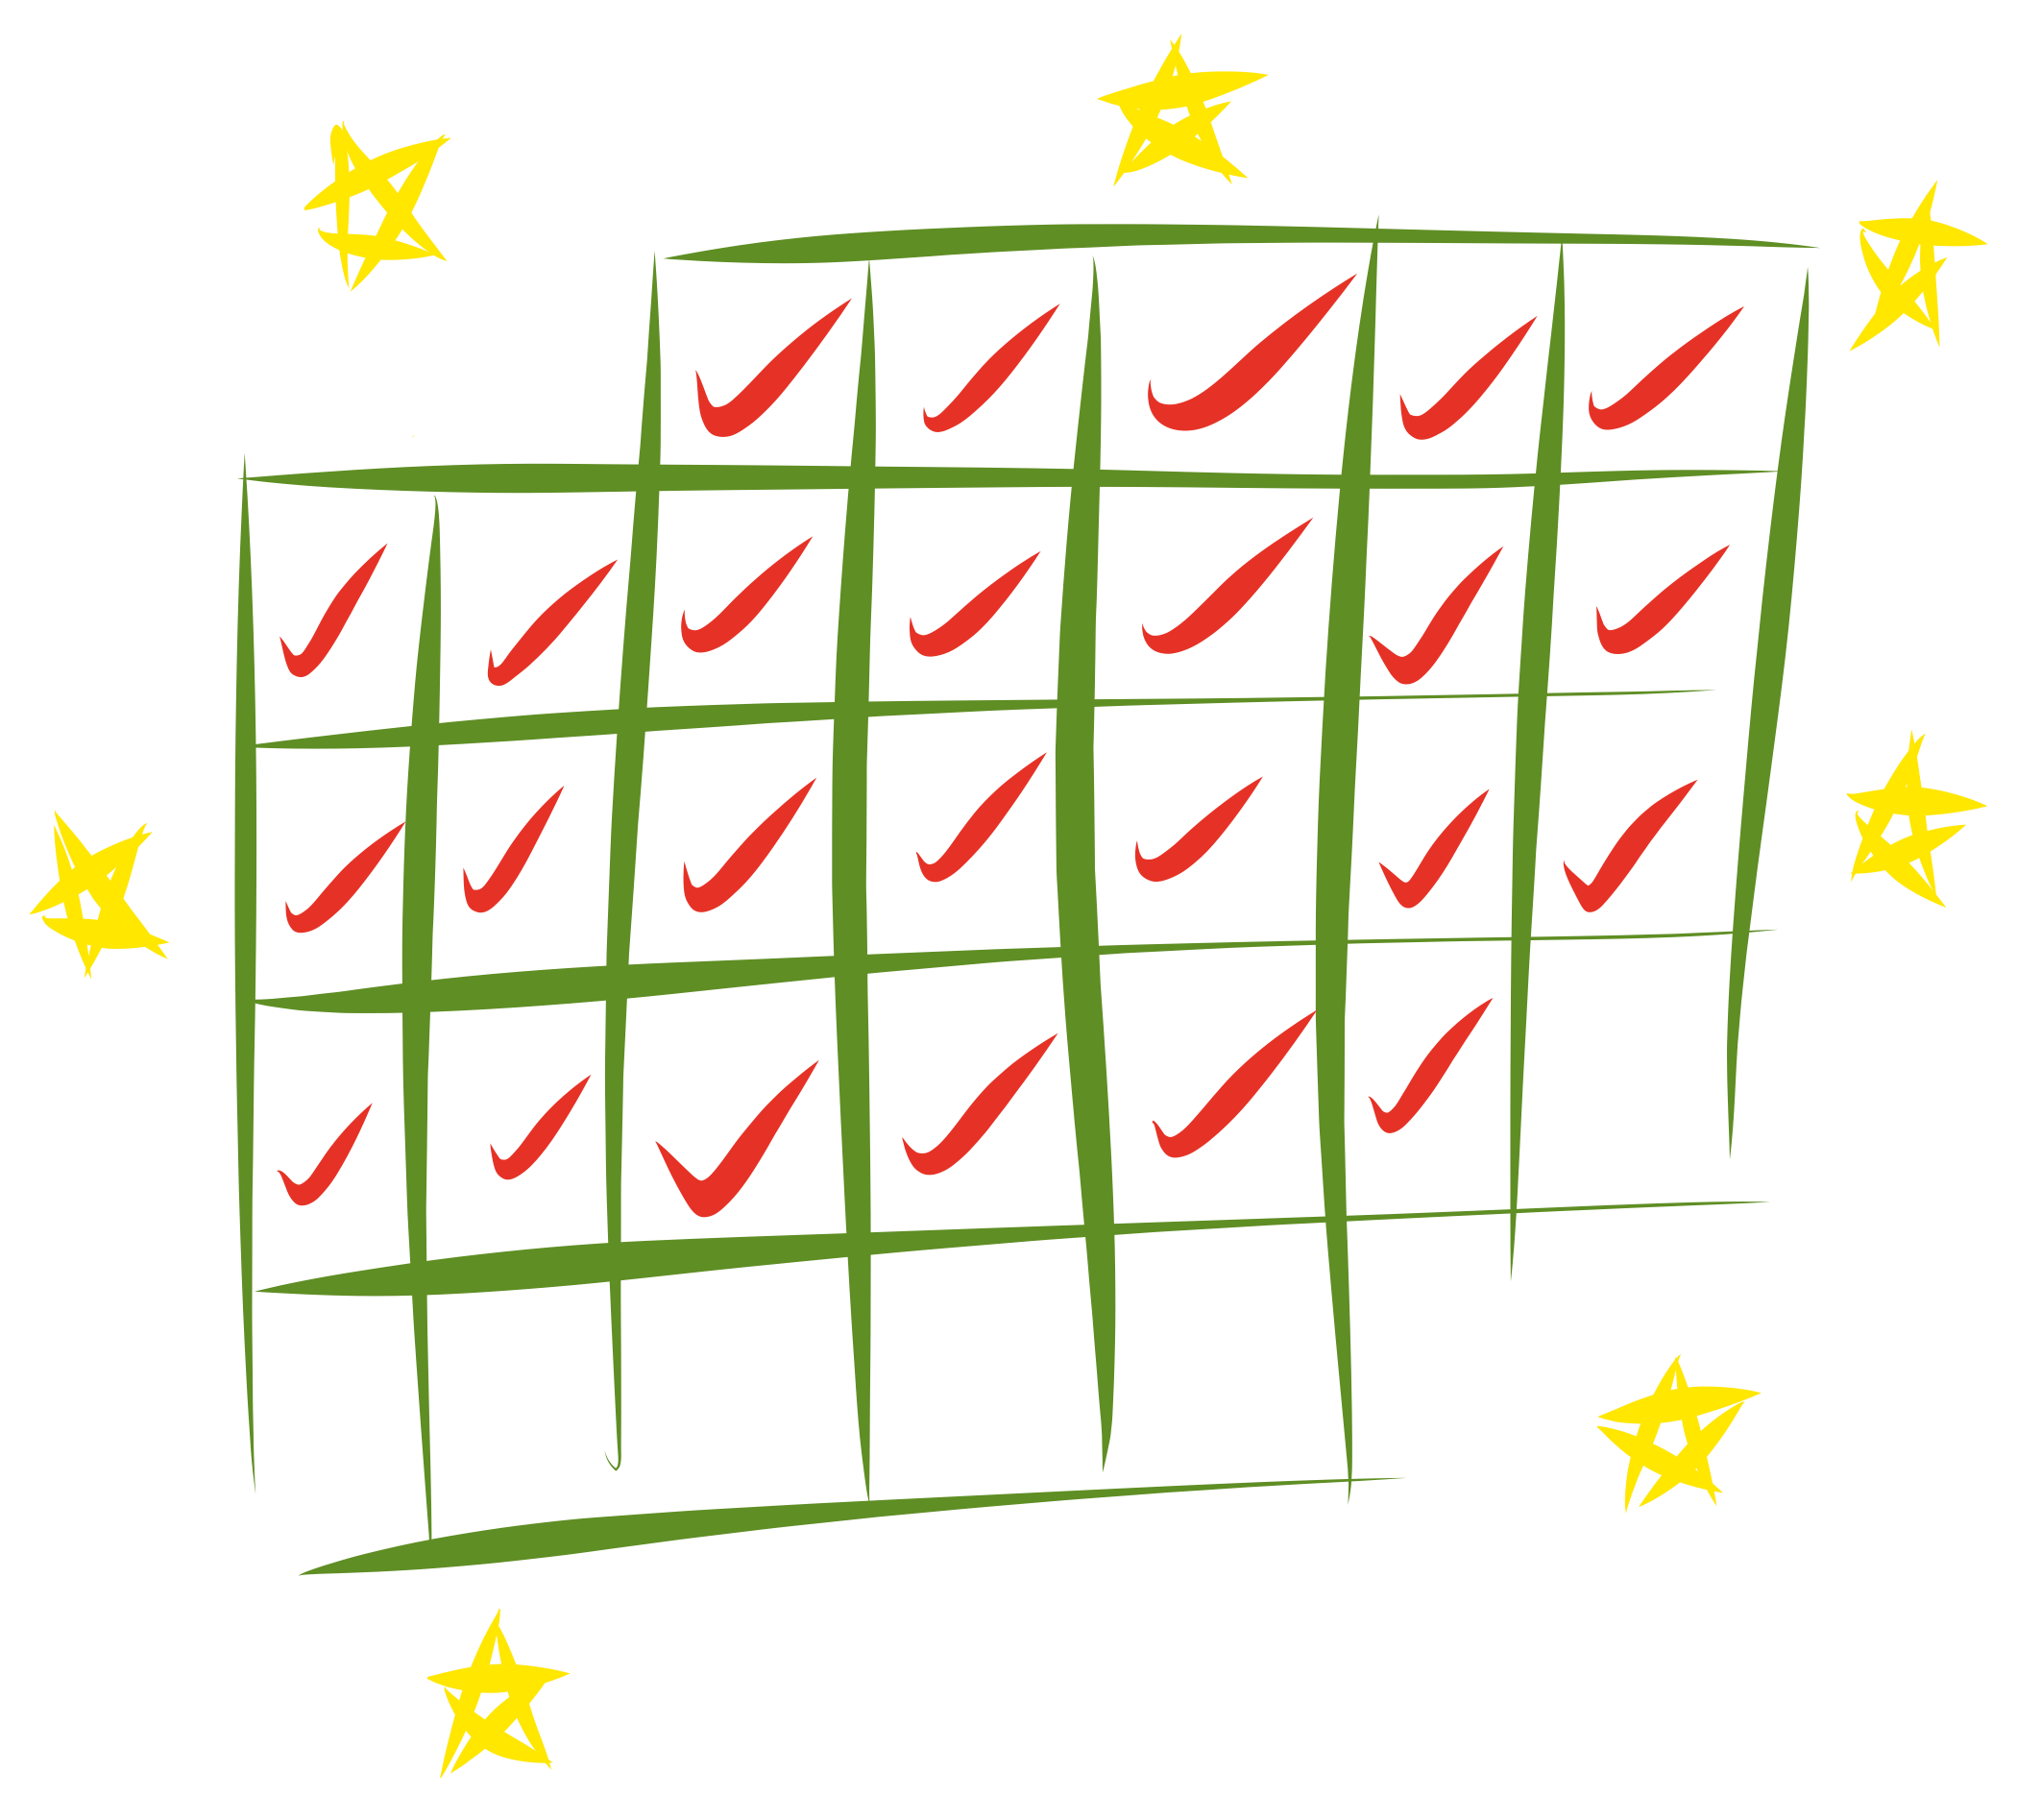 An advent calendar with all days checked, surrounded by stars